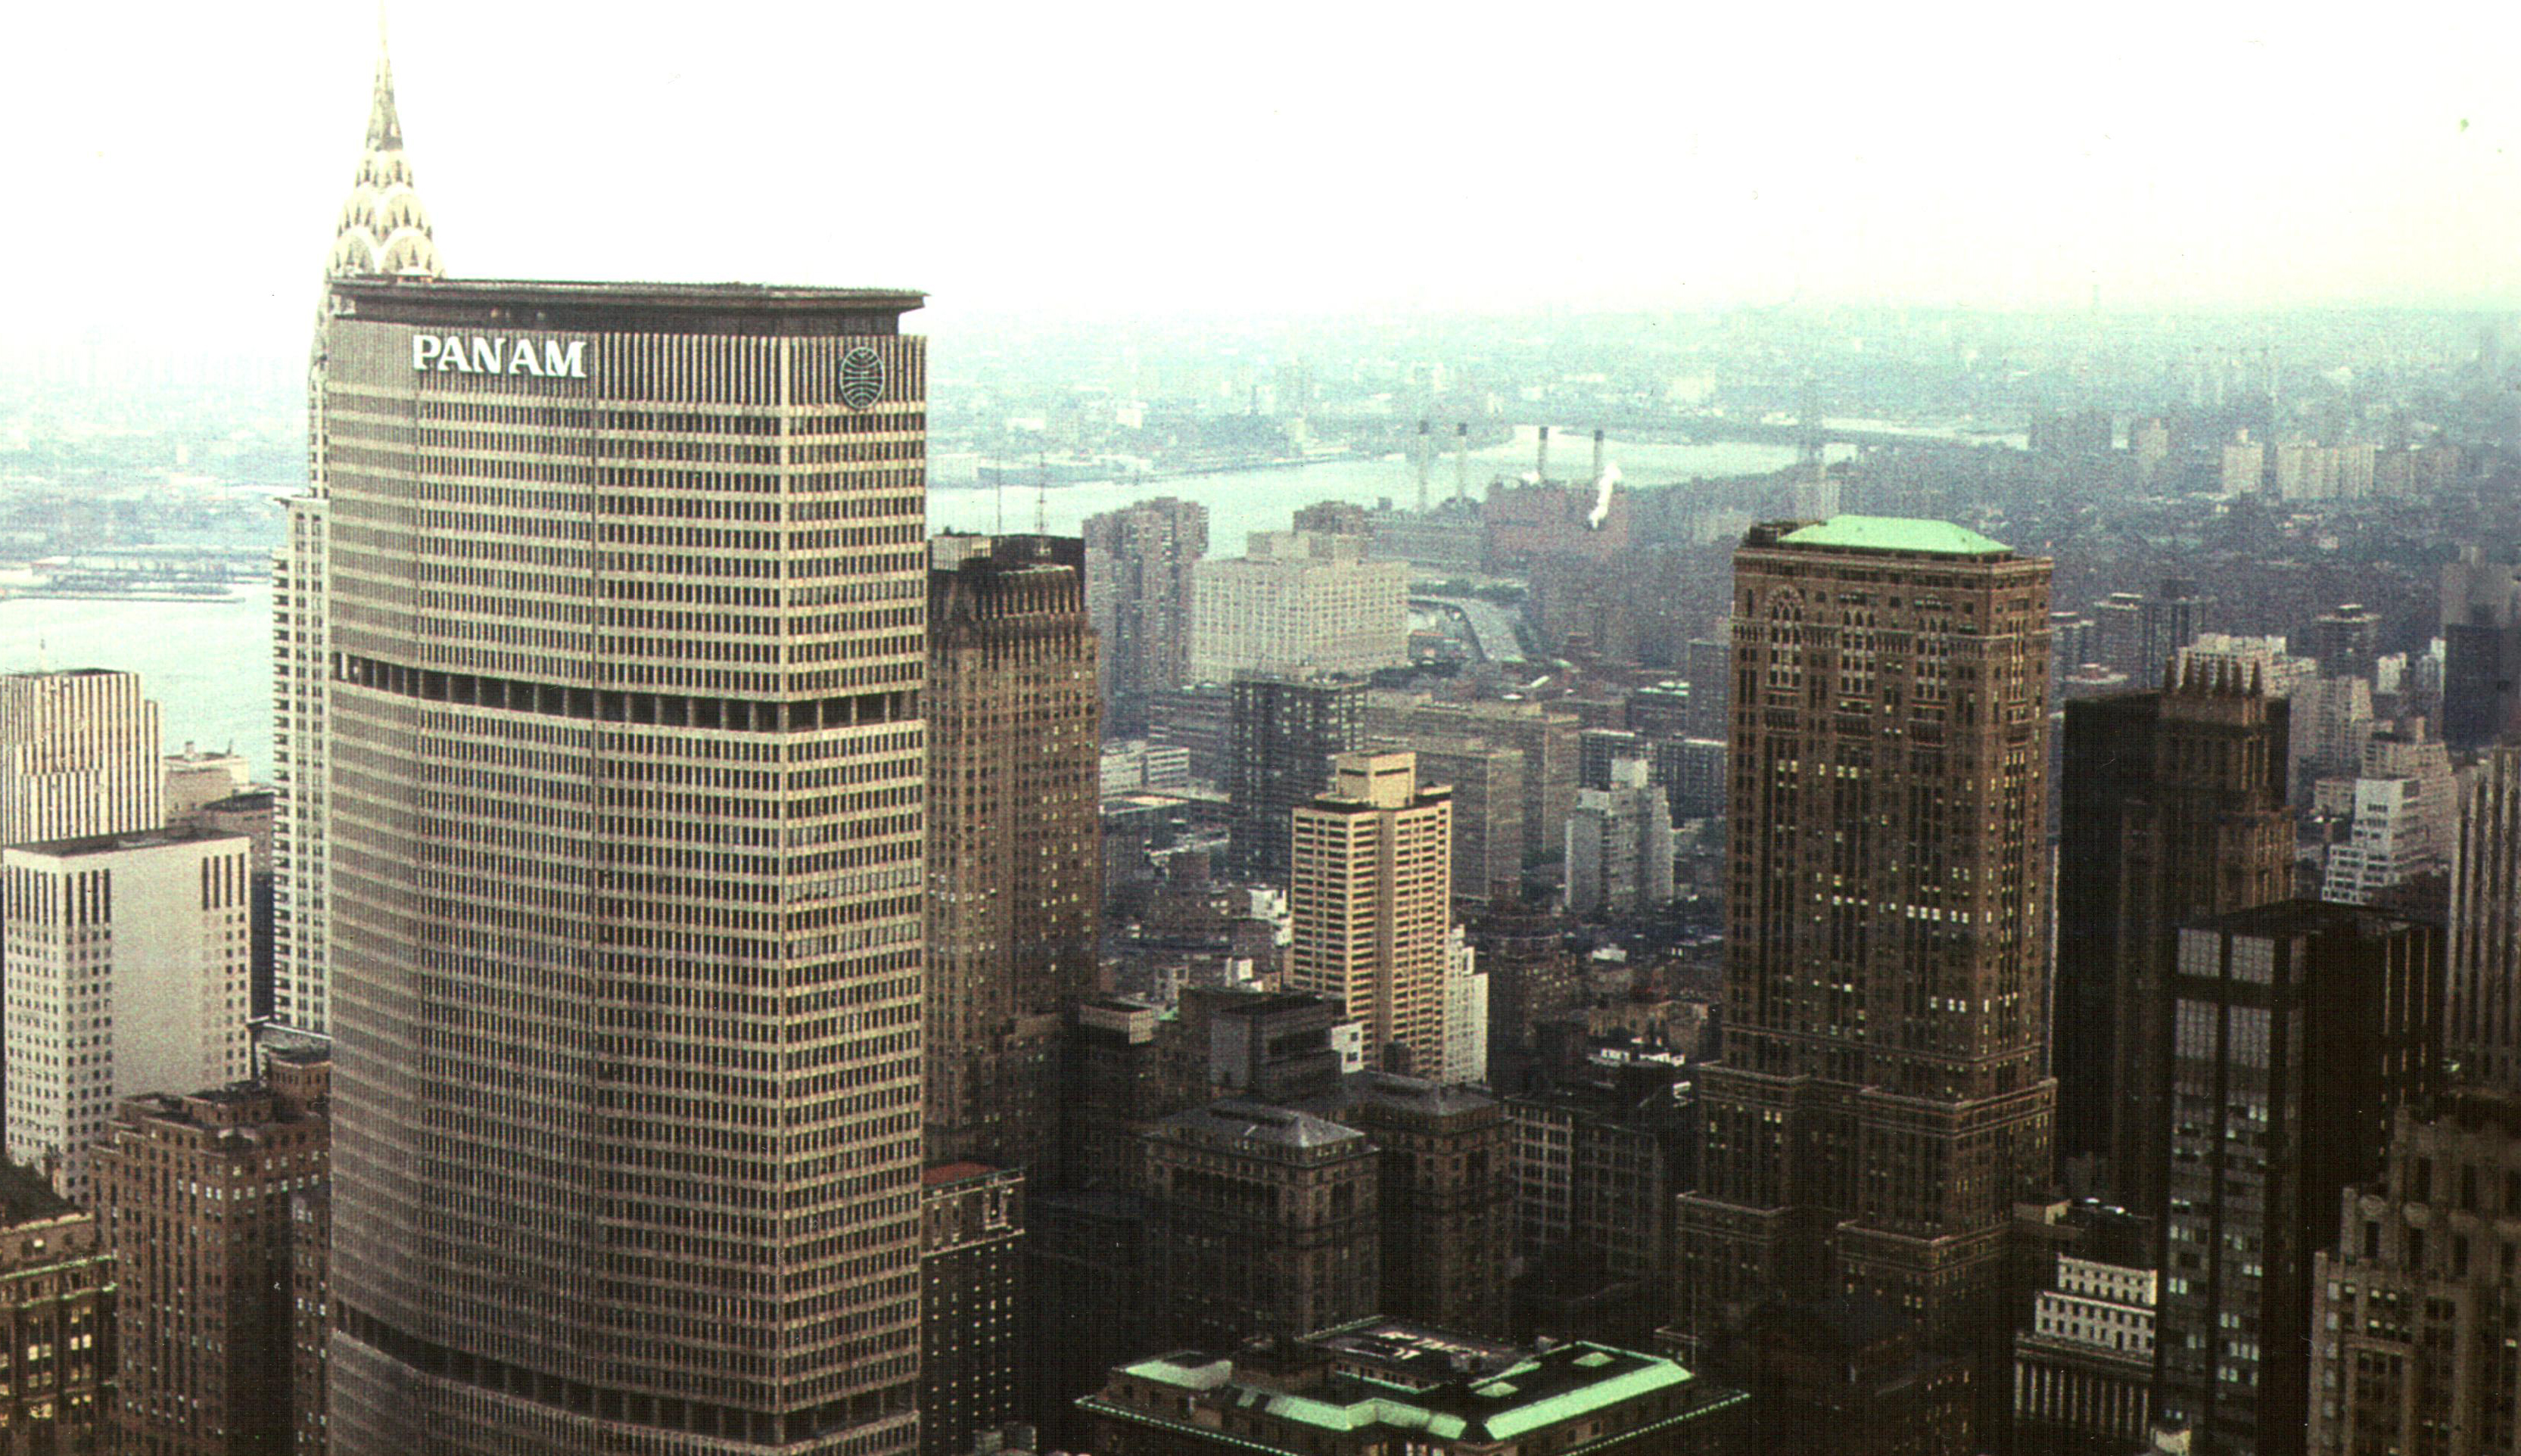 The Pan Am Building in 1977. Photo by Derzsi Elekes via Wikimedia Commons.